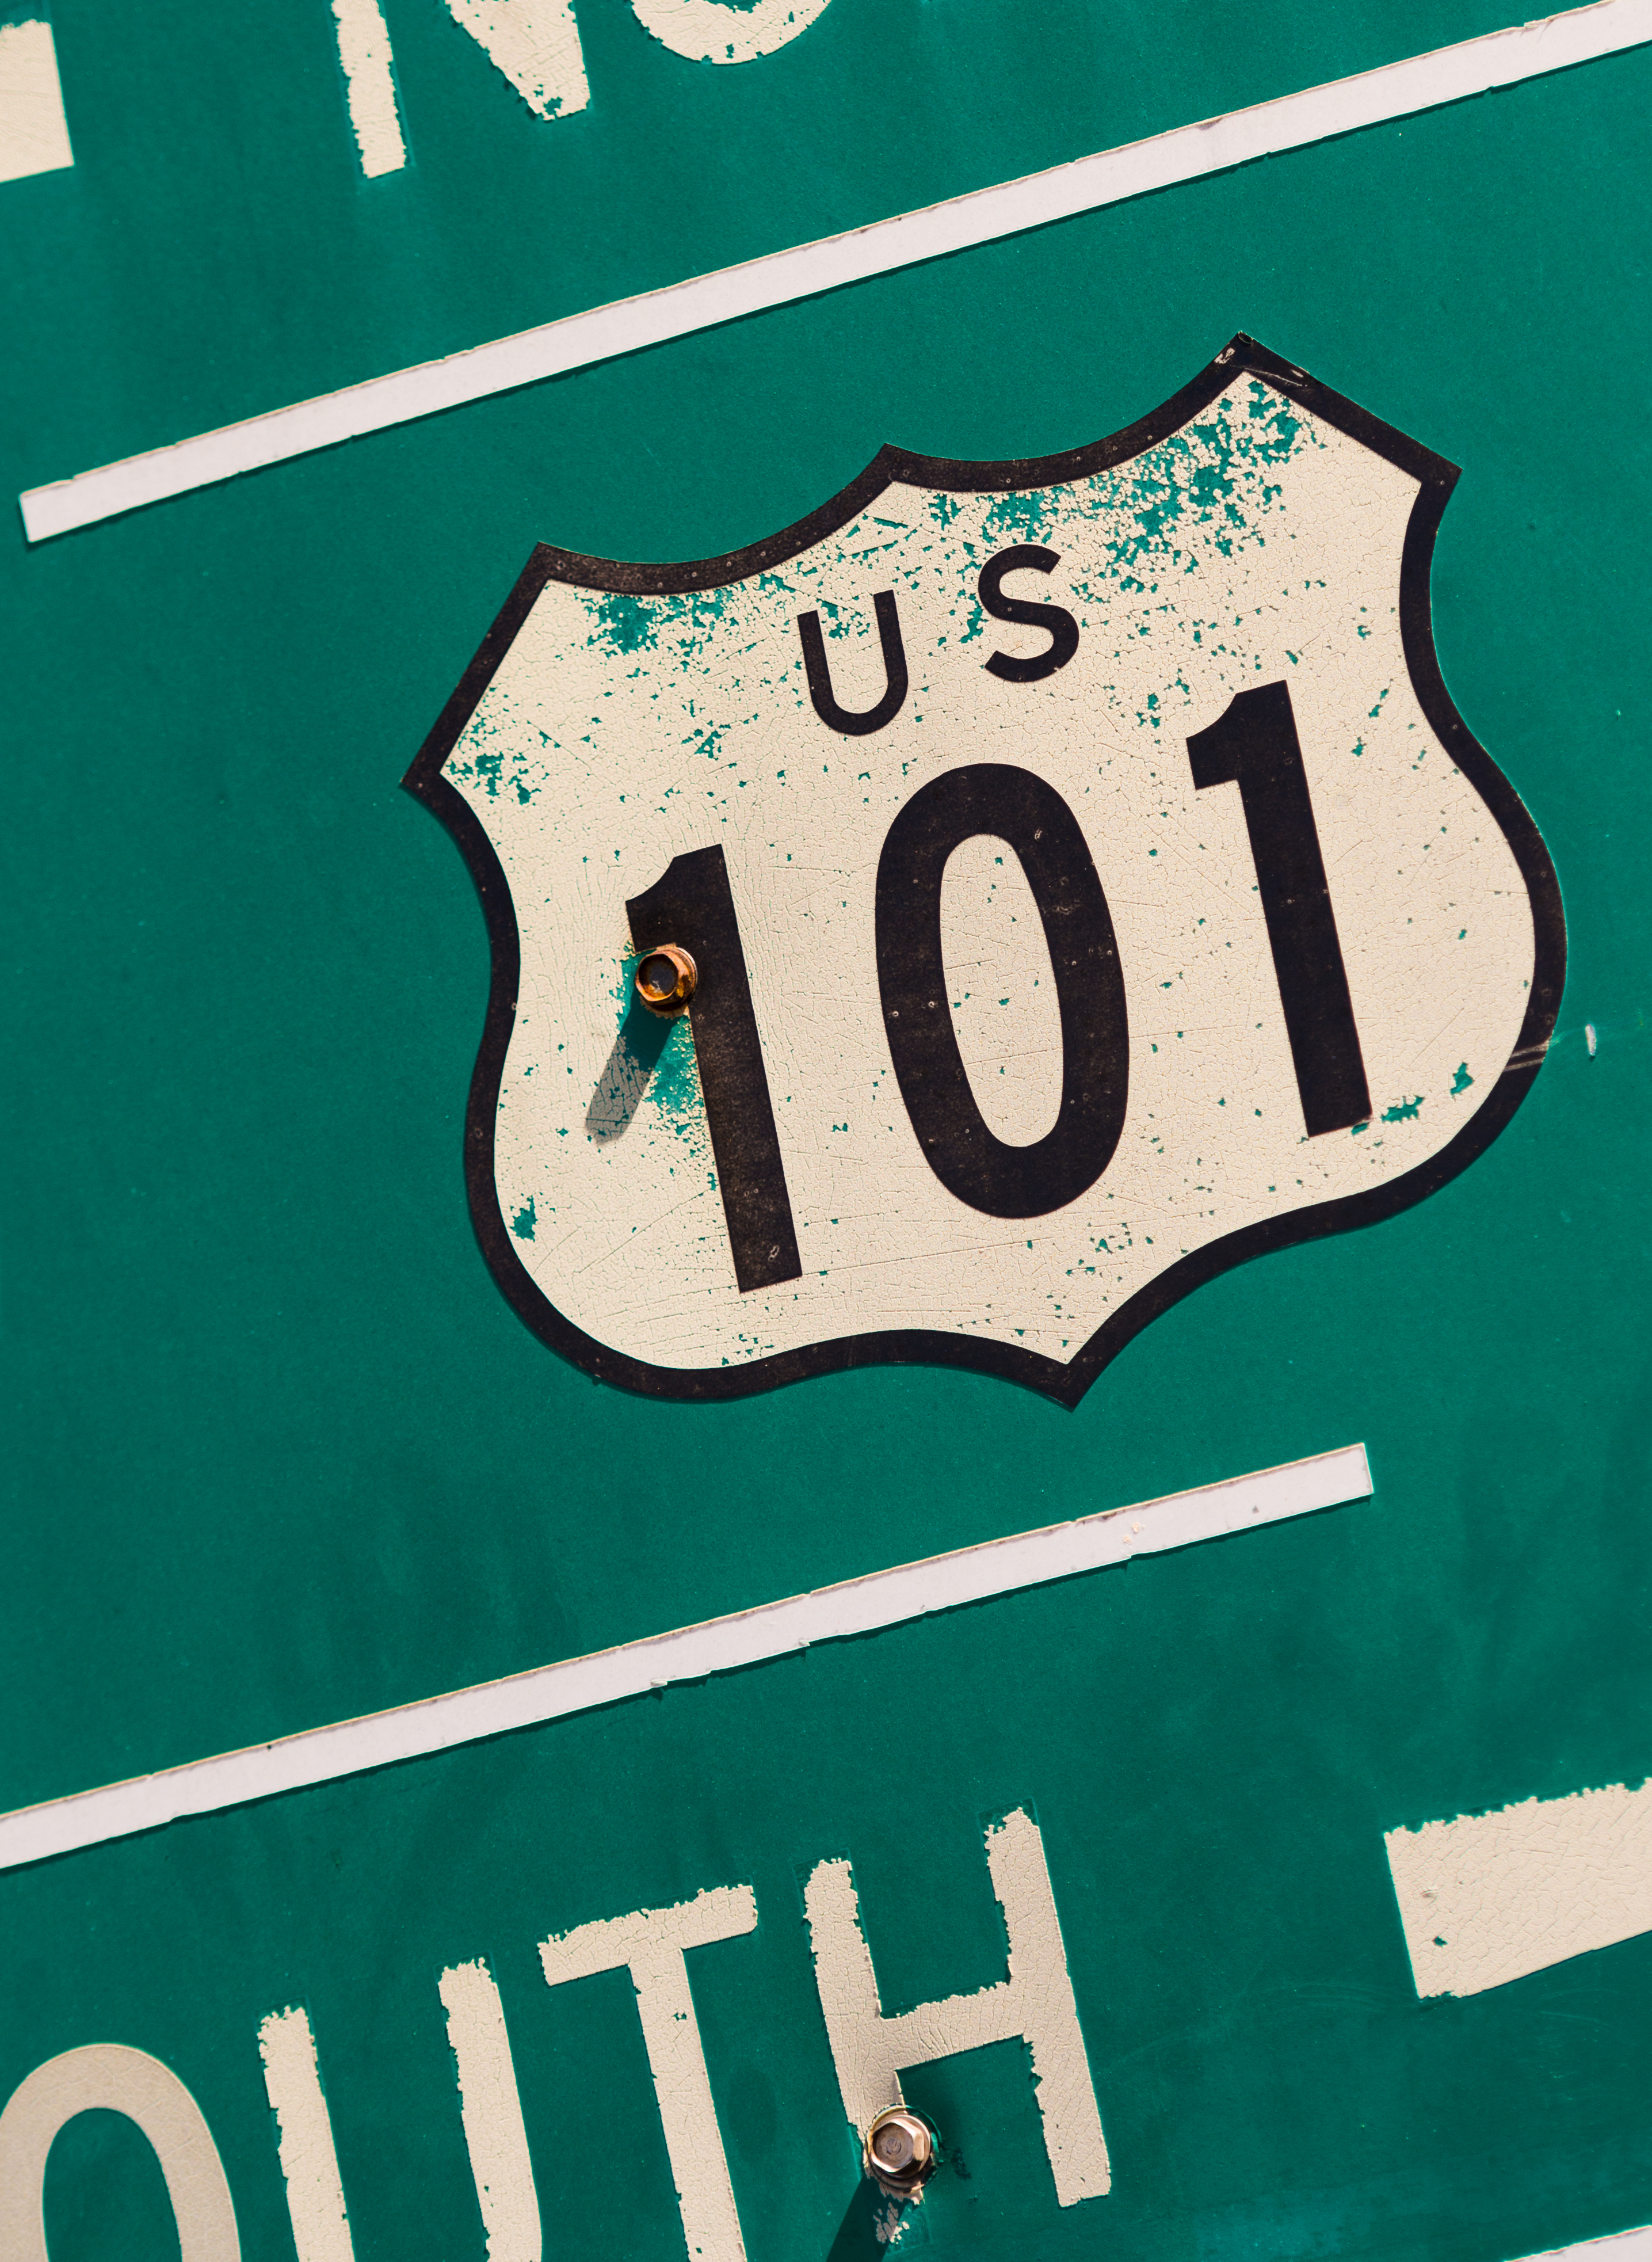 Section 101 - https://depositphotos.com/28667711/stock-photo-green-us-101-south-highway.html